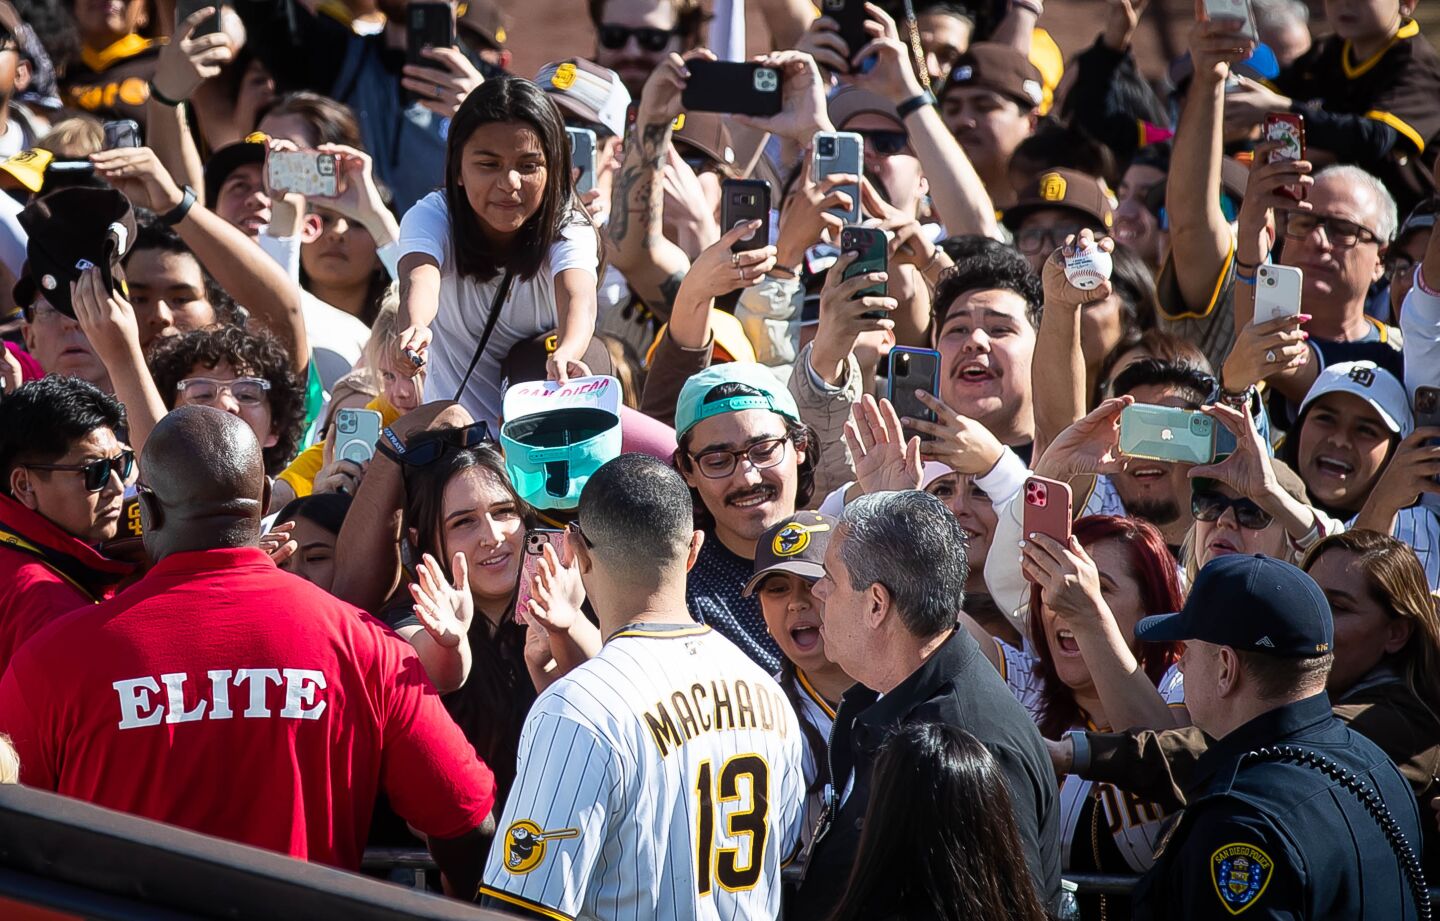 Fans react to seeing Manny Machado during the Padres' 2023 FanFest at Petco Park on Saturday, Feb. 4, 2023.